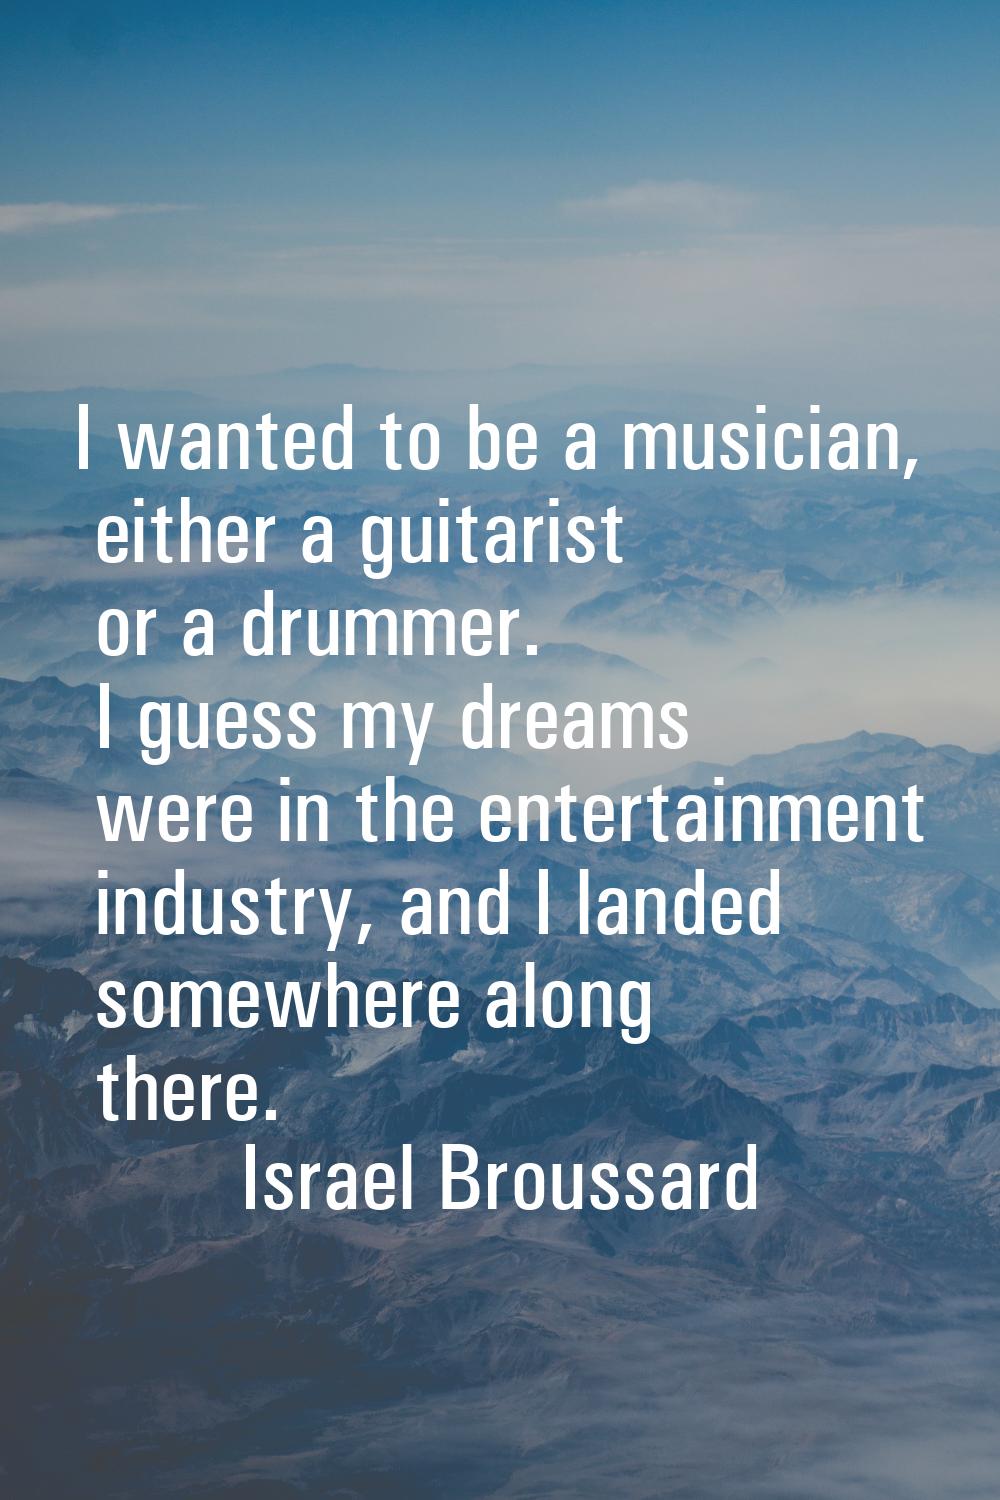 I wanted to be a musician, either a guitarist or a drummer. I guess my dreams were in the entertain